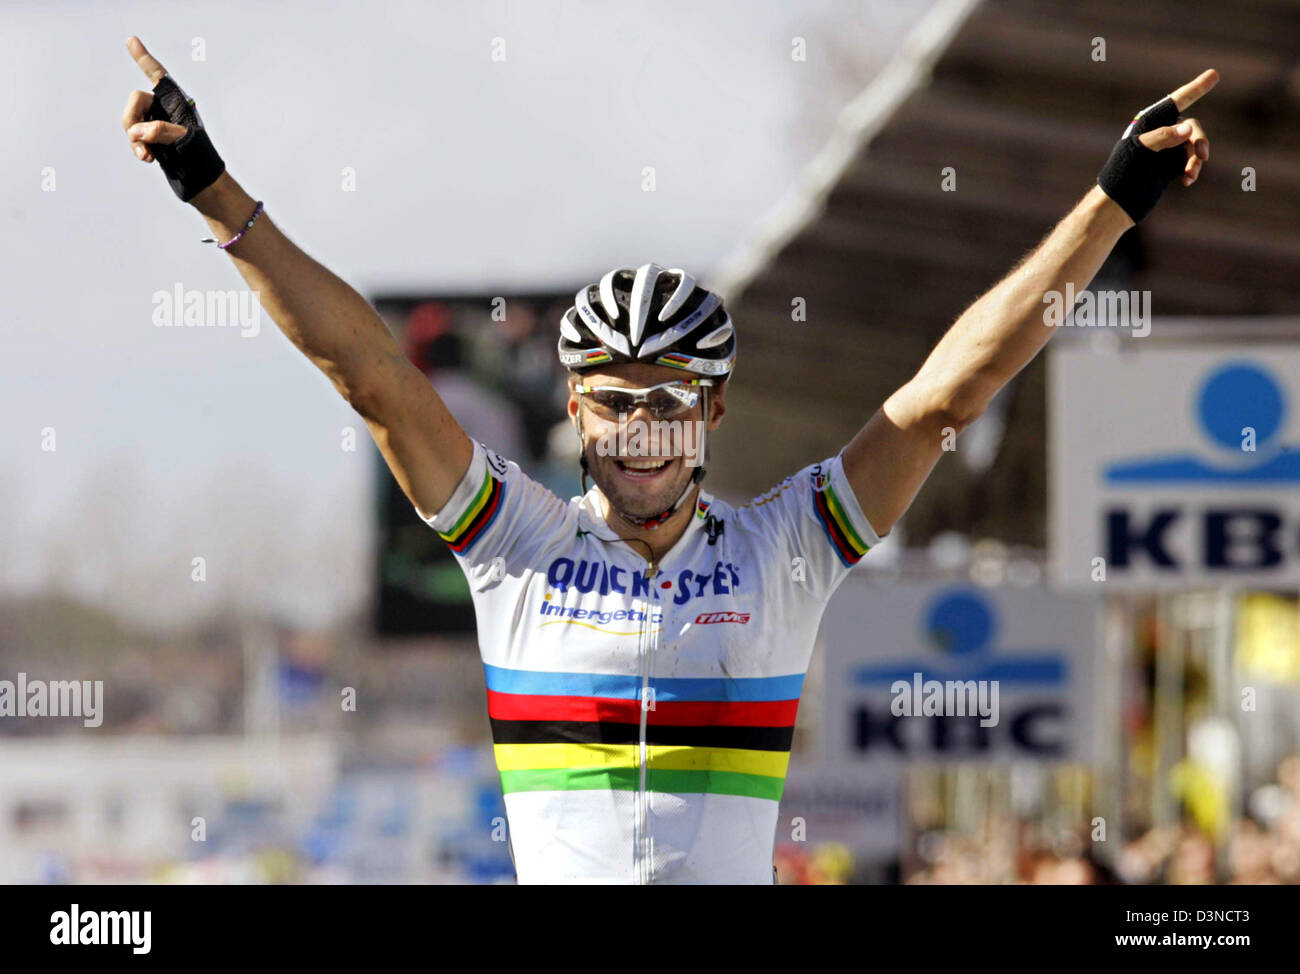 Belgian cycling pro Tom Boonen of Team Quickstep celebrates after winning the ProTour Flanders cycling race in Meerbeke, Belgium, 02 April 2006. The course covered a distance of 258 kilometres from the town of Bruges to Meerbeke. Photo: Bernd Thissen Stock Photo